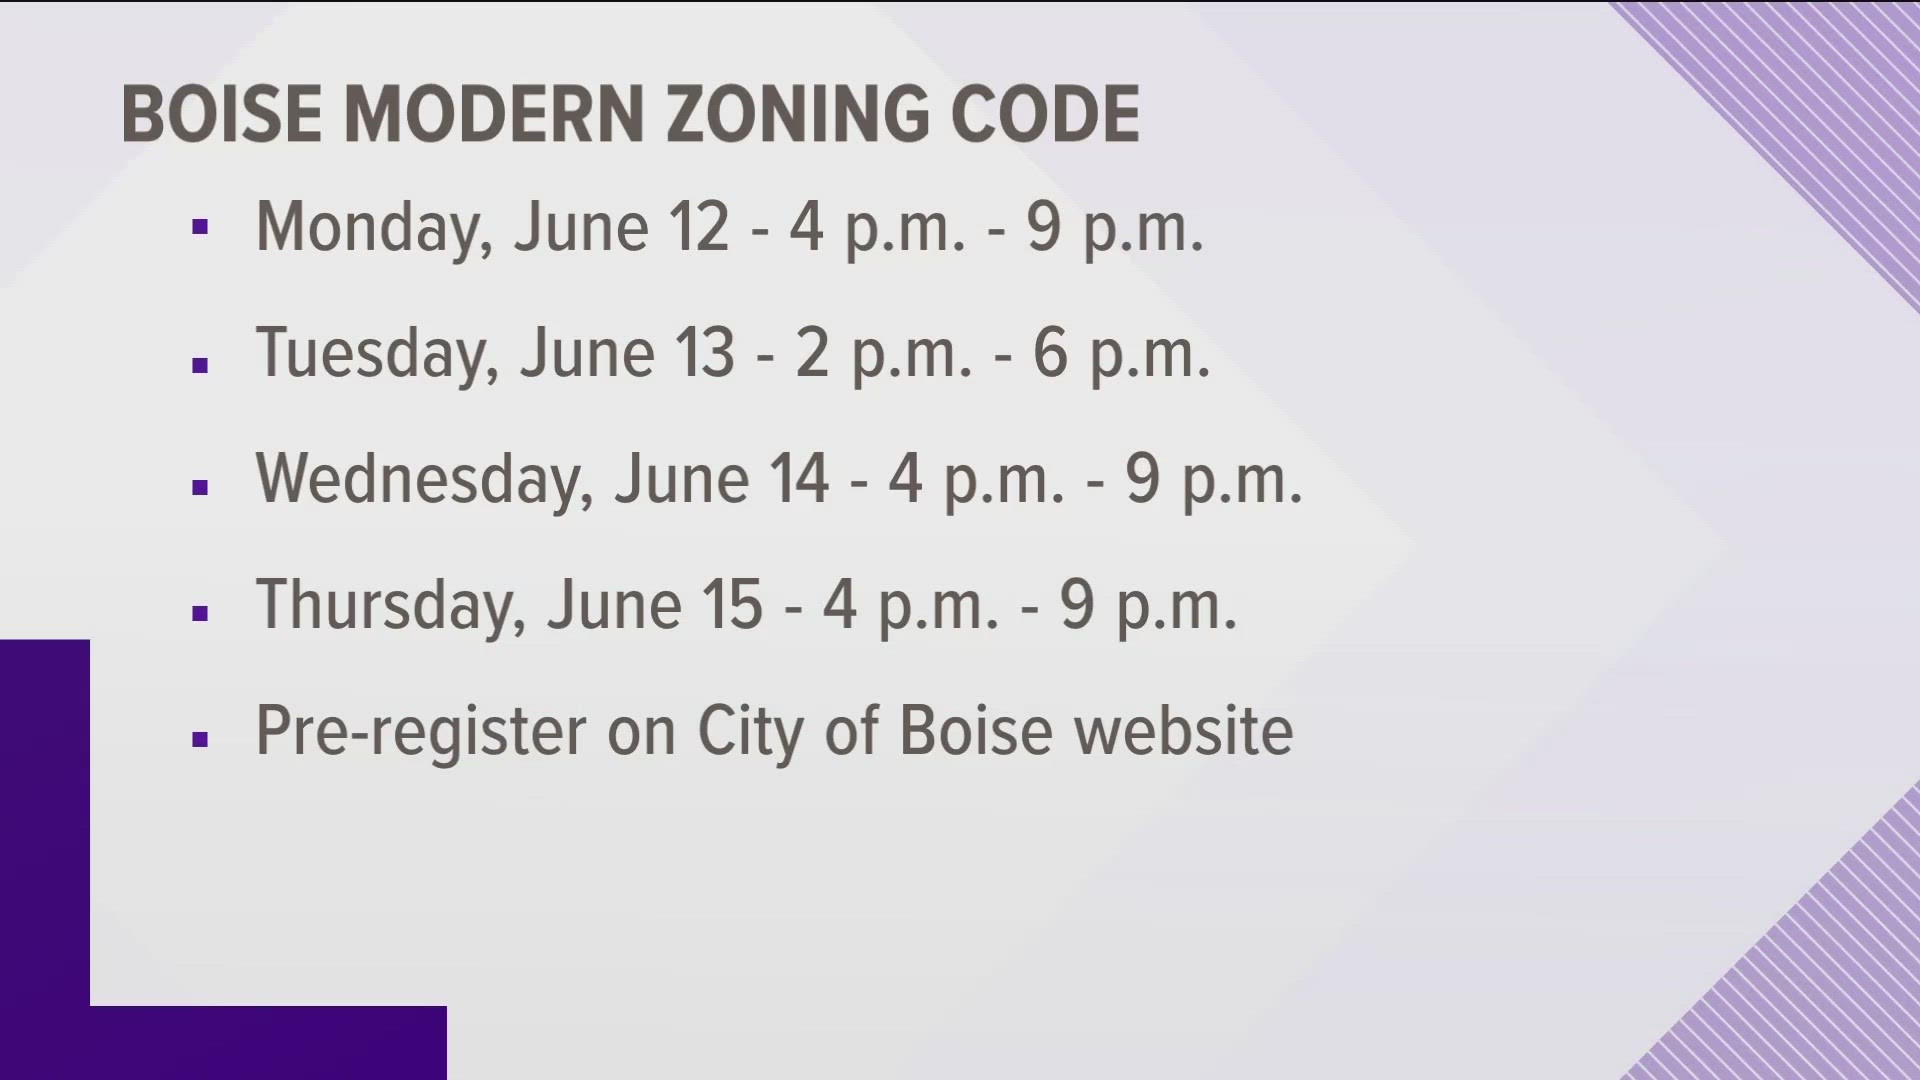 From June 12 - June 15, the public will have more opportunity to share their thoughts on the proposed code.